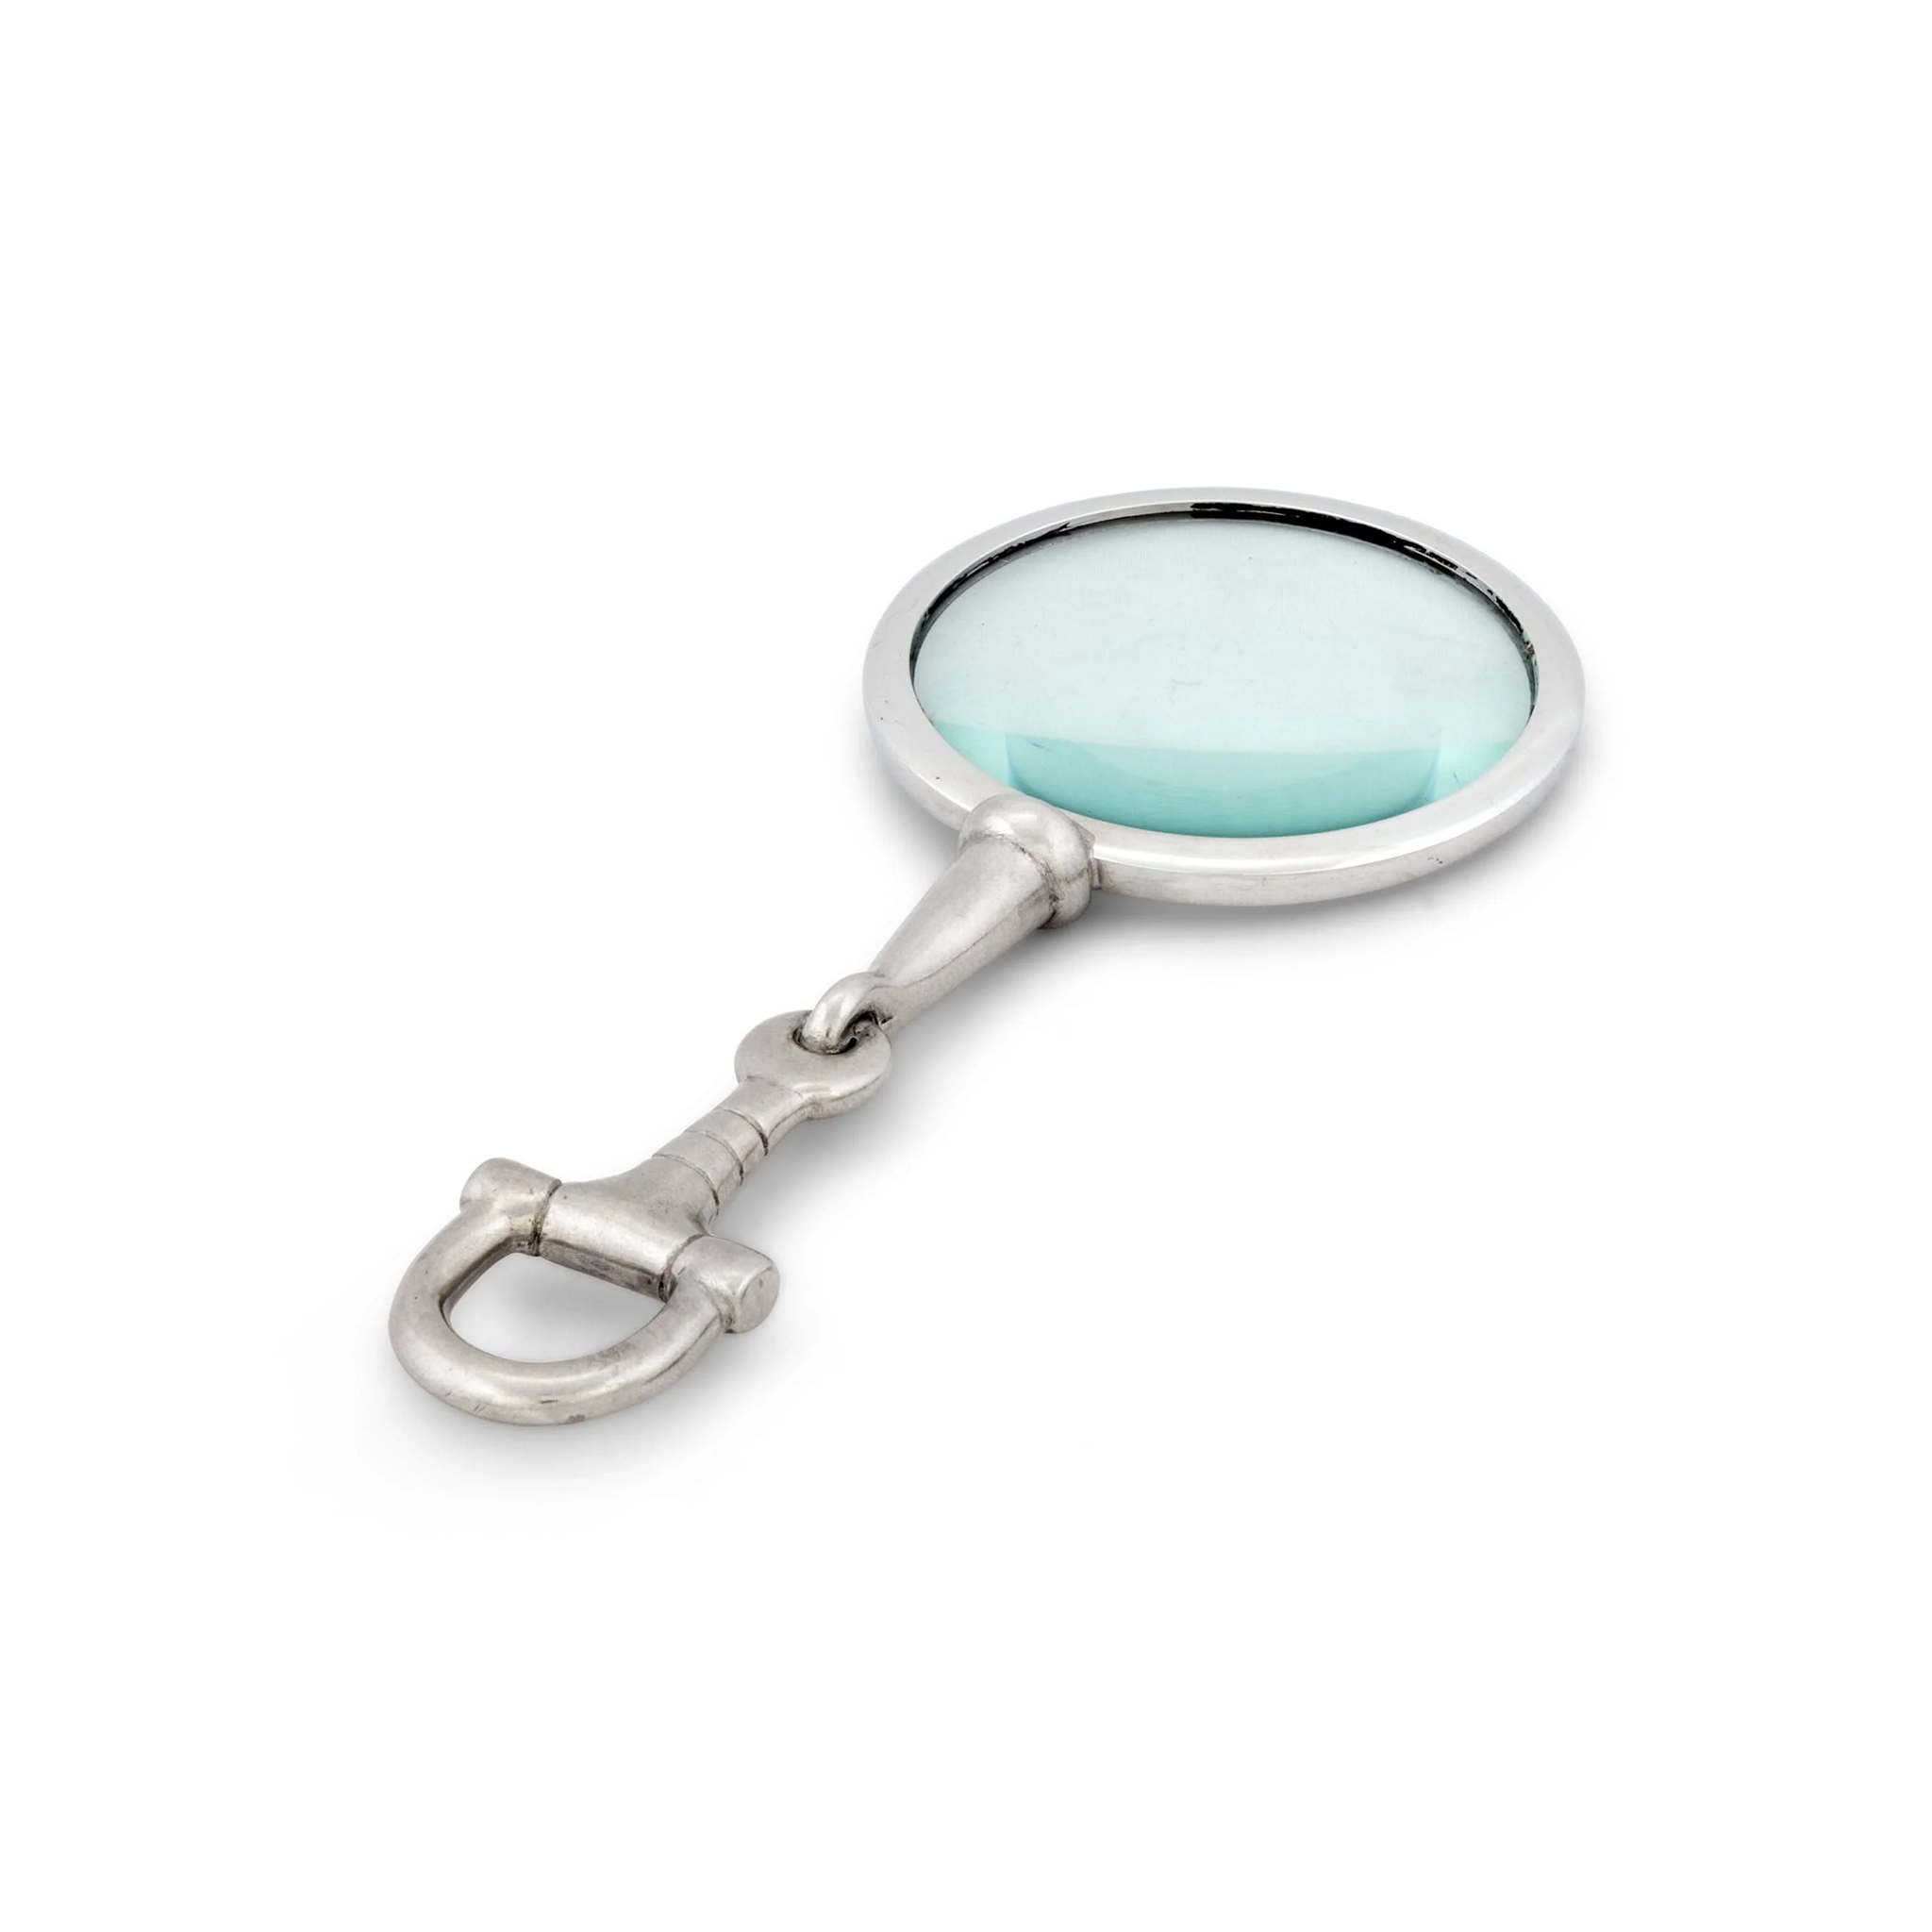 an equestrian pewter magnifying glass on a white surface